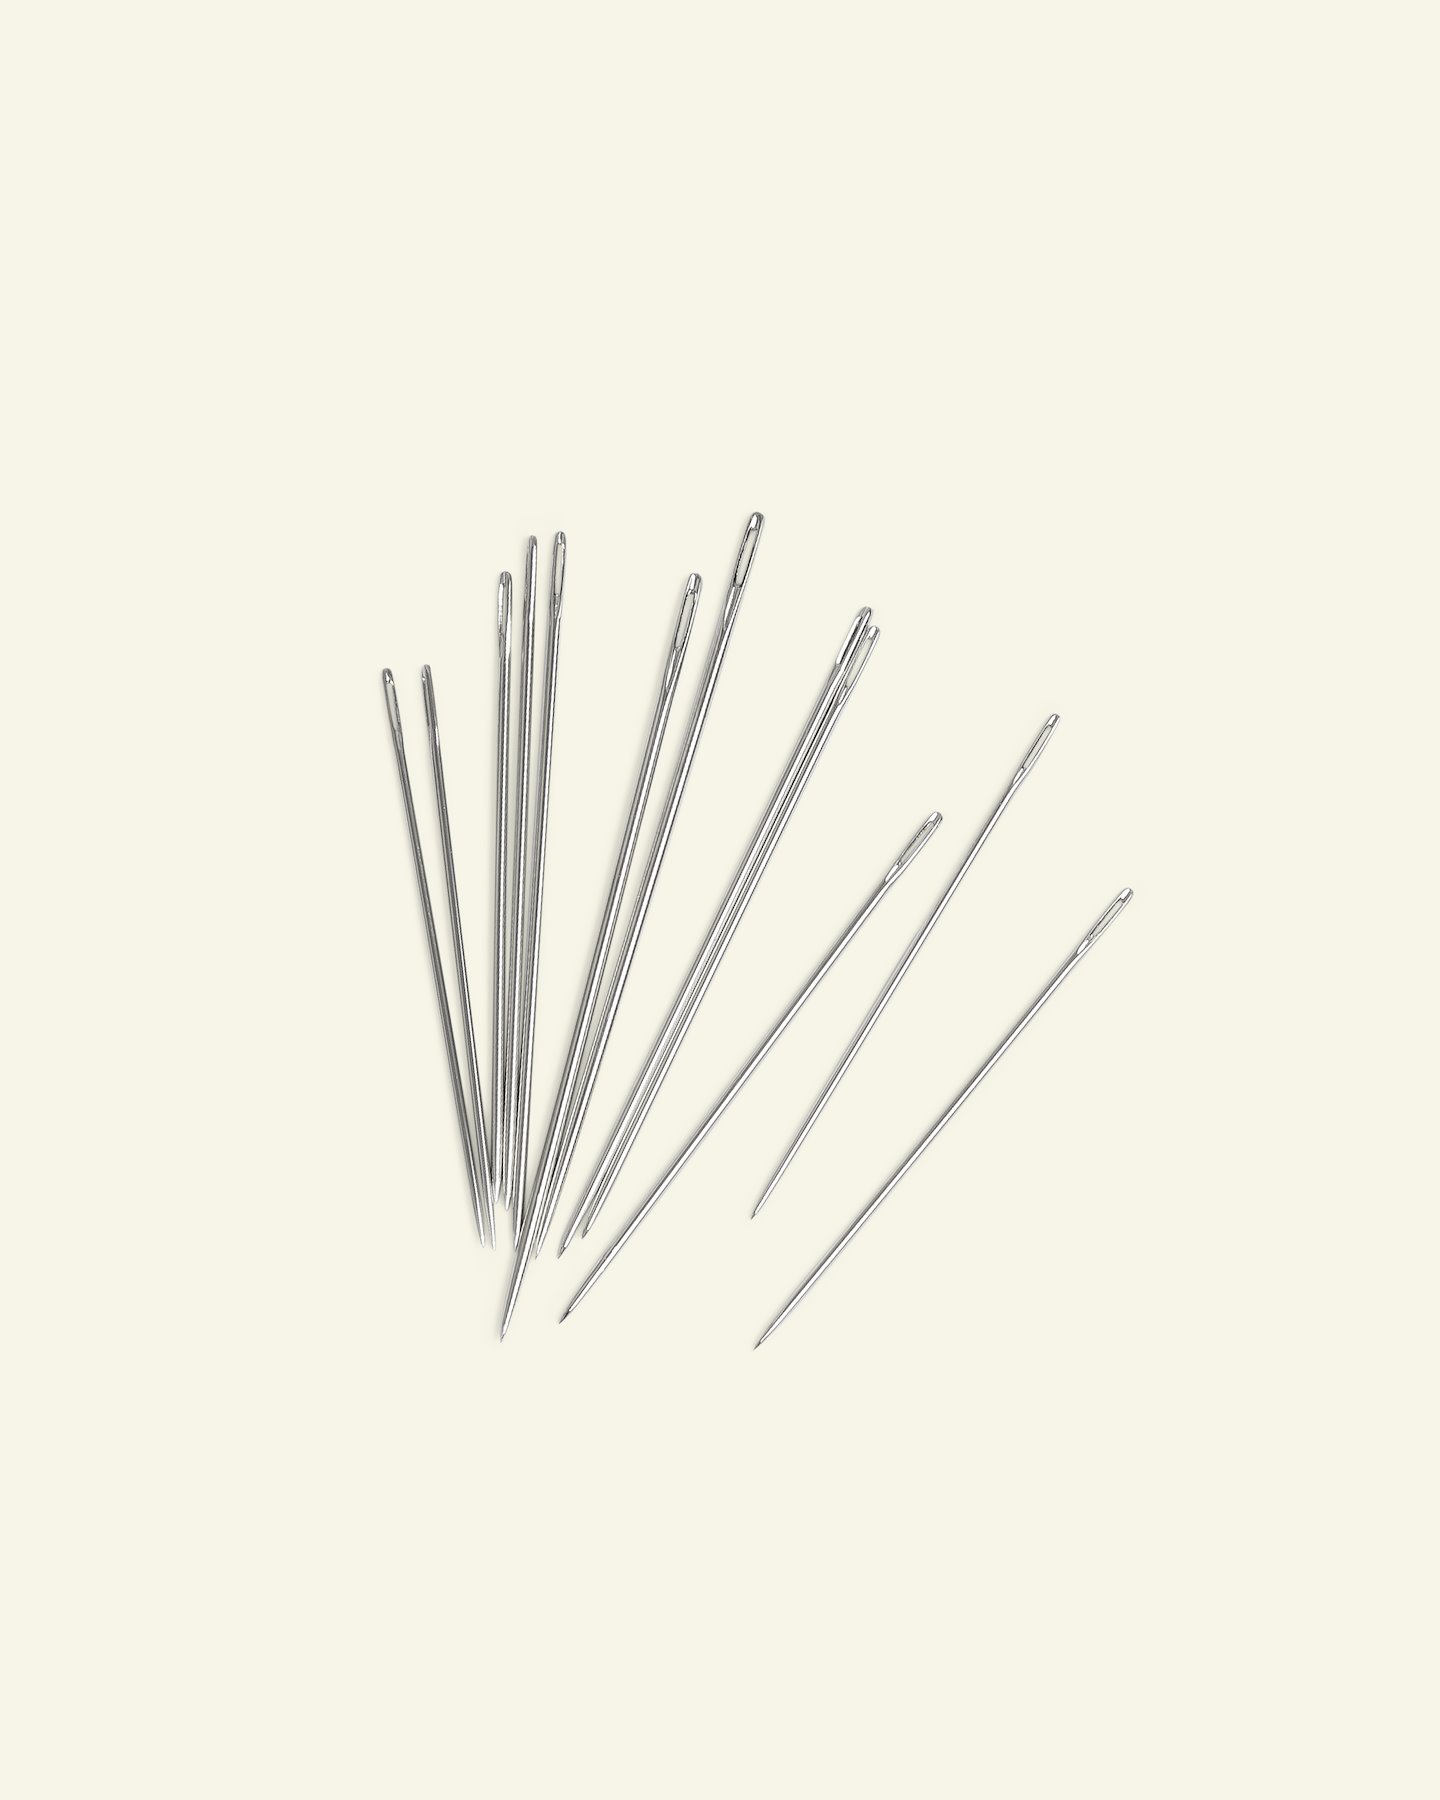 Embroidery needles size 1-5 12pcs 46524_pack